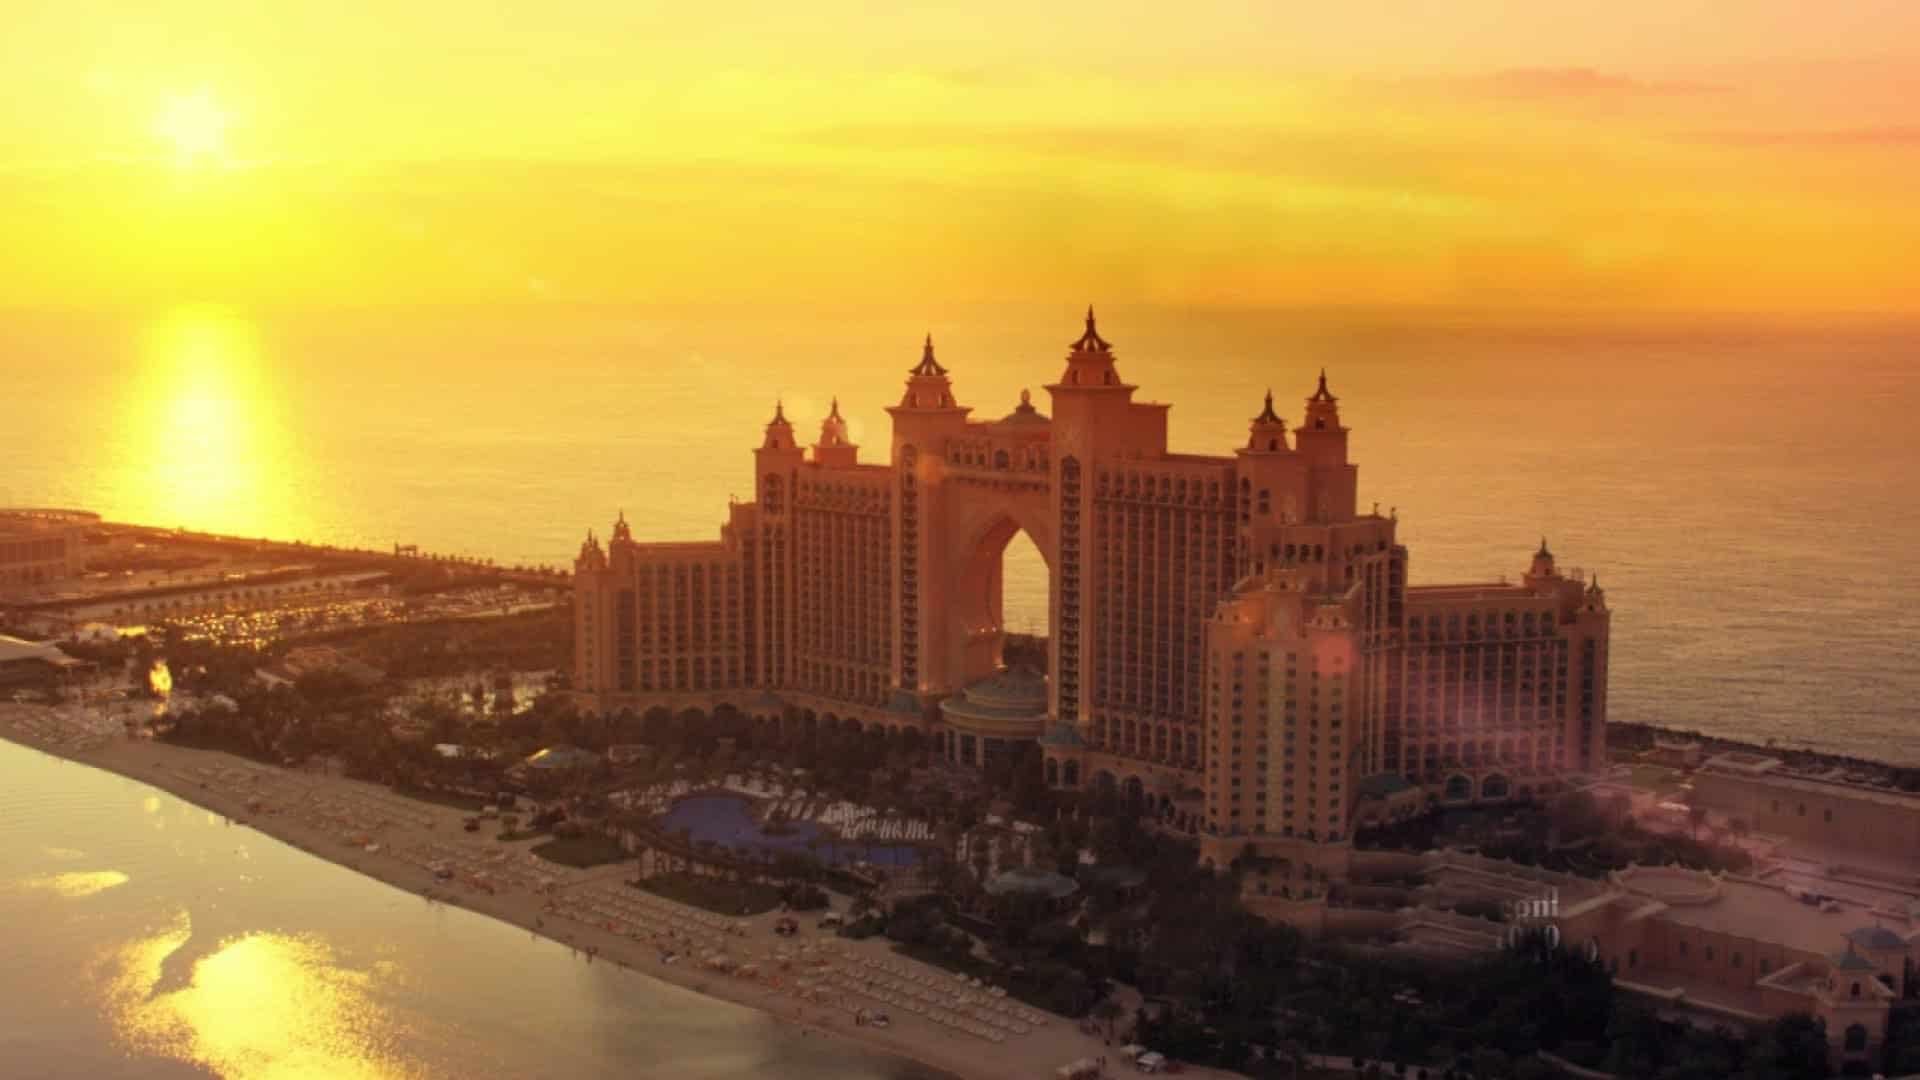 Image of Atlantis, the palm during sunset